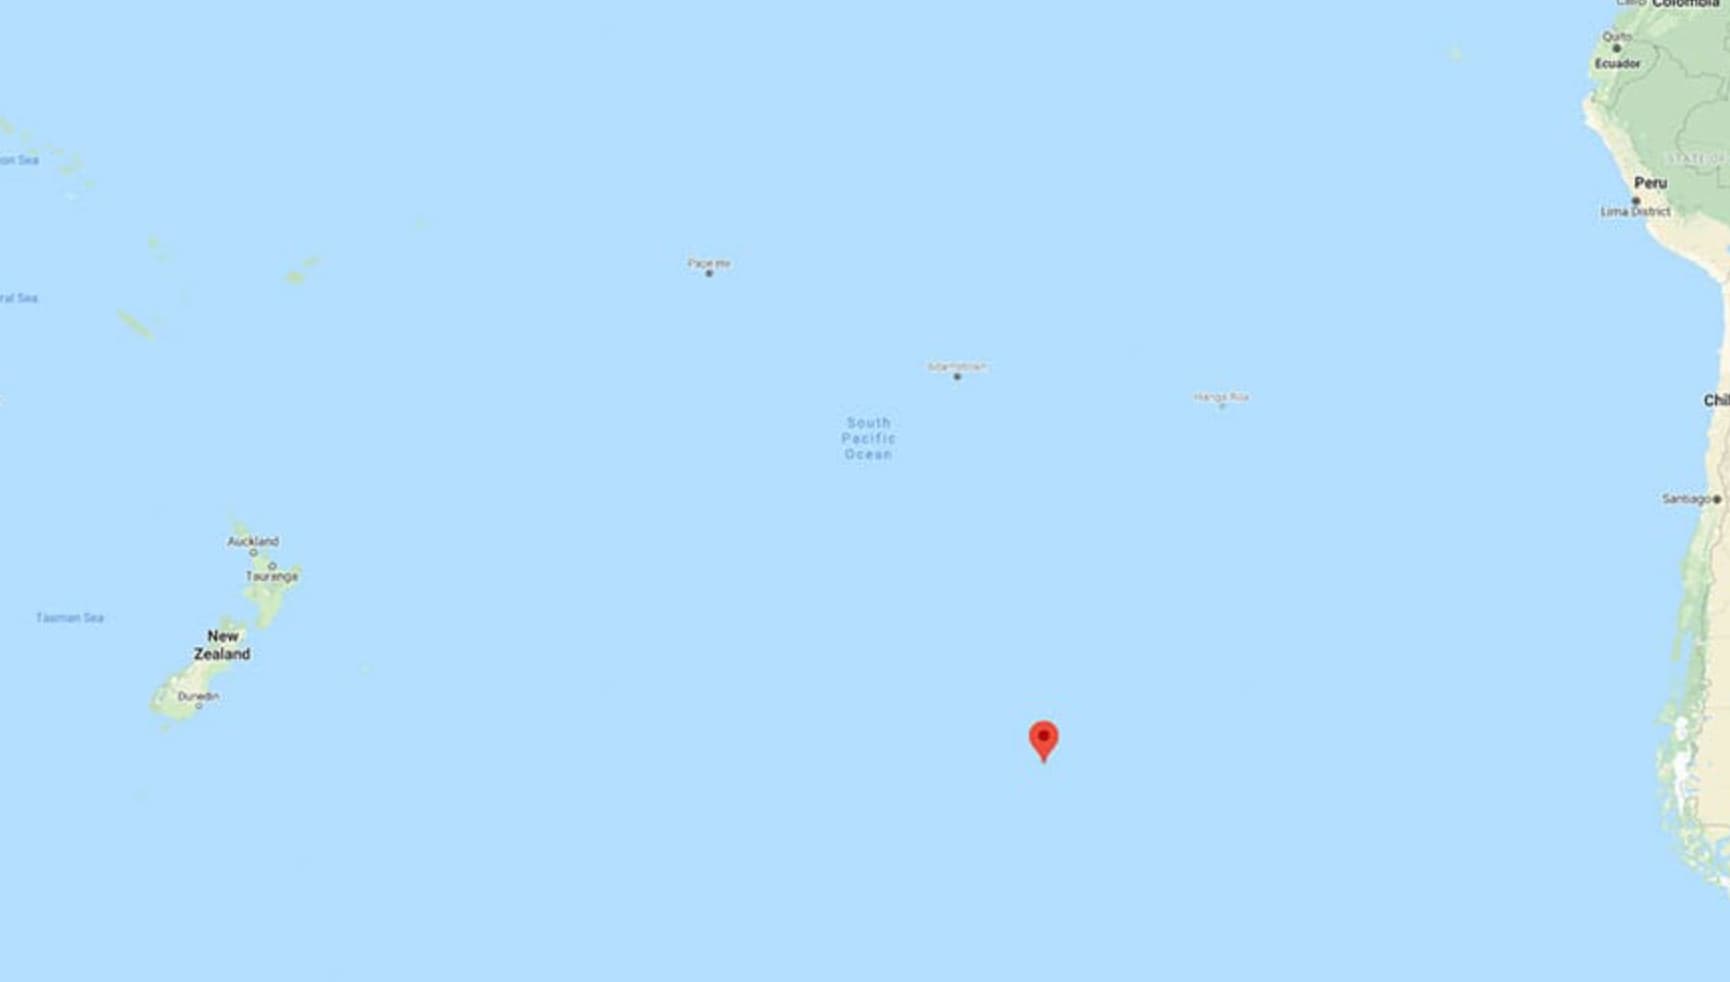 “We don't know where Point Nemo is. The coordinates of the most remote spot in the ocean have only been calculated using published coastline datasets. No one has ever taken GPS readings at the three closest land points to Point Nemo which is what it would take to calculate it precisely.”